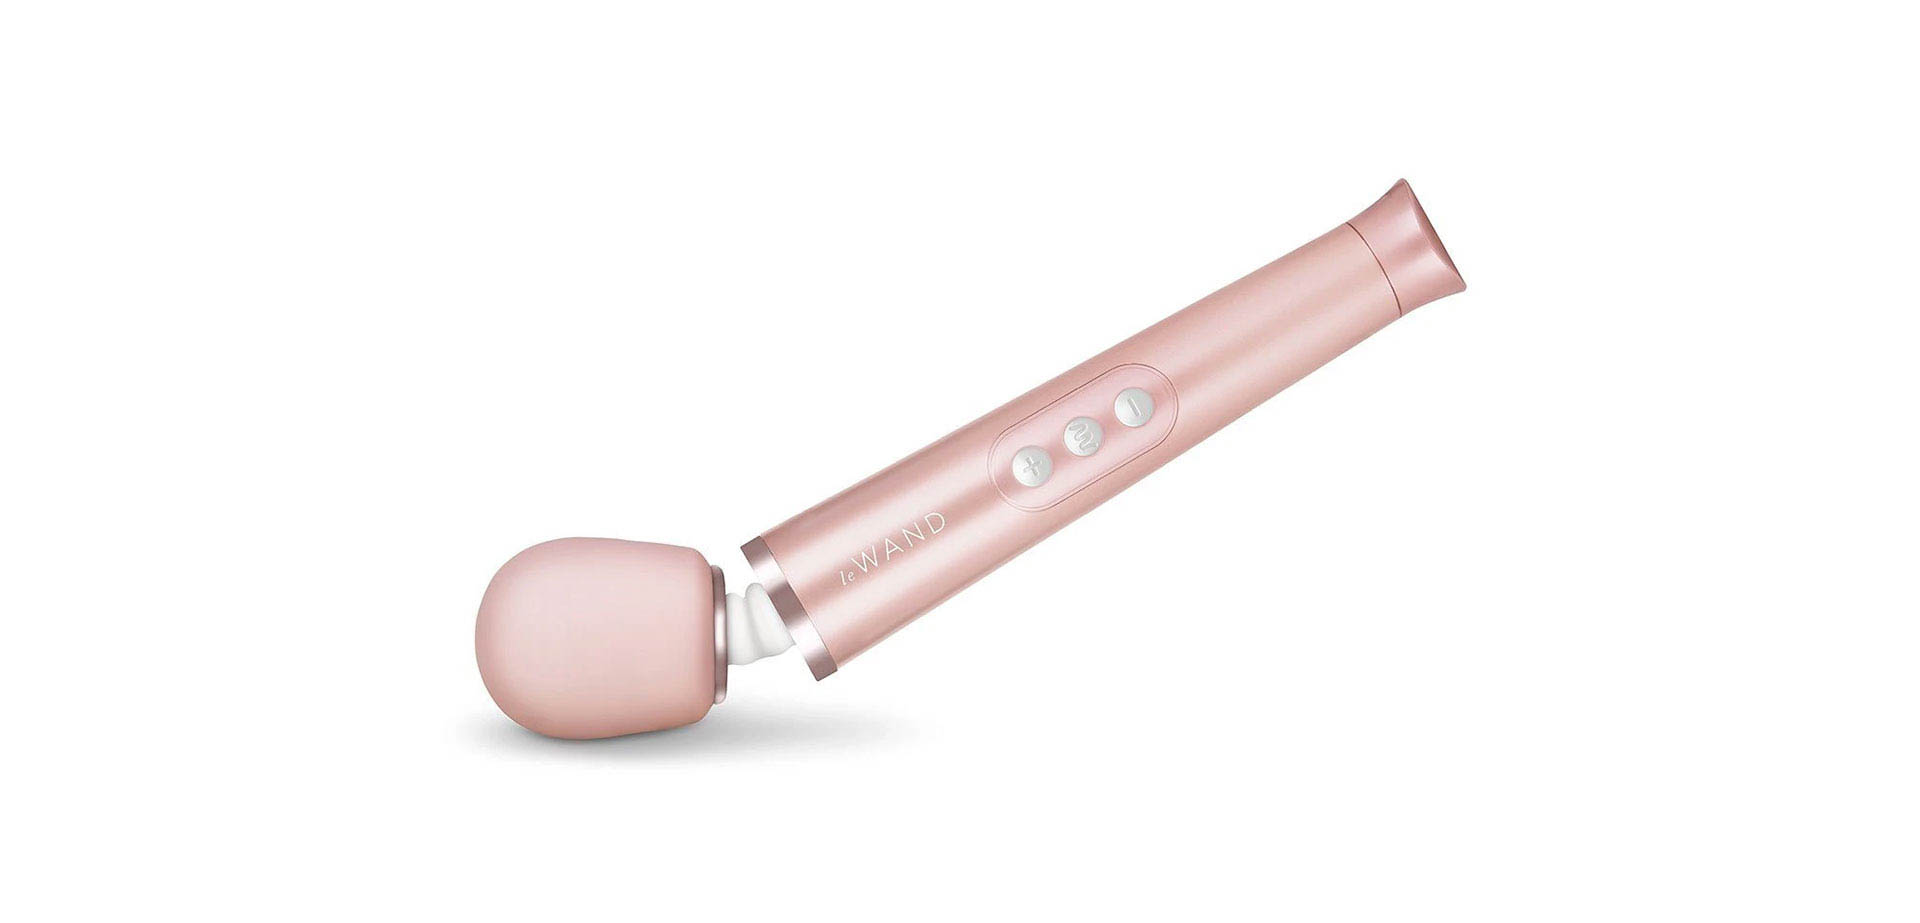 Wand vibrator for beginners.